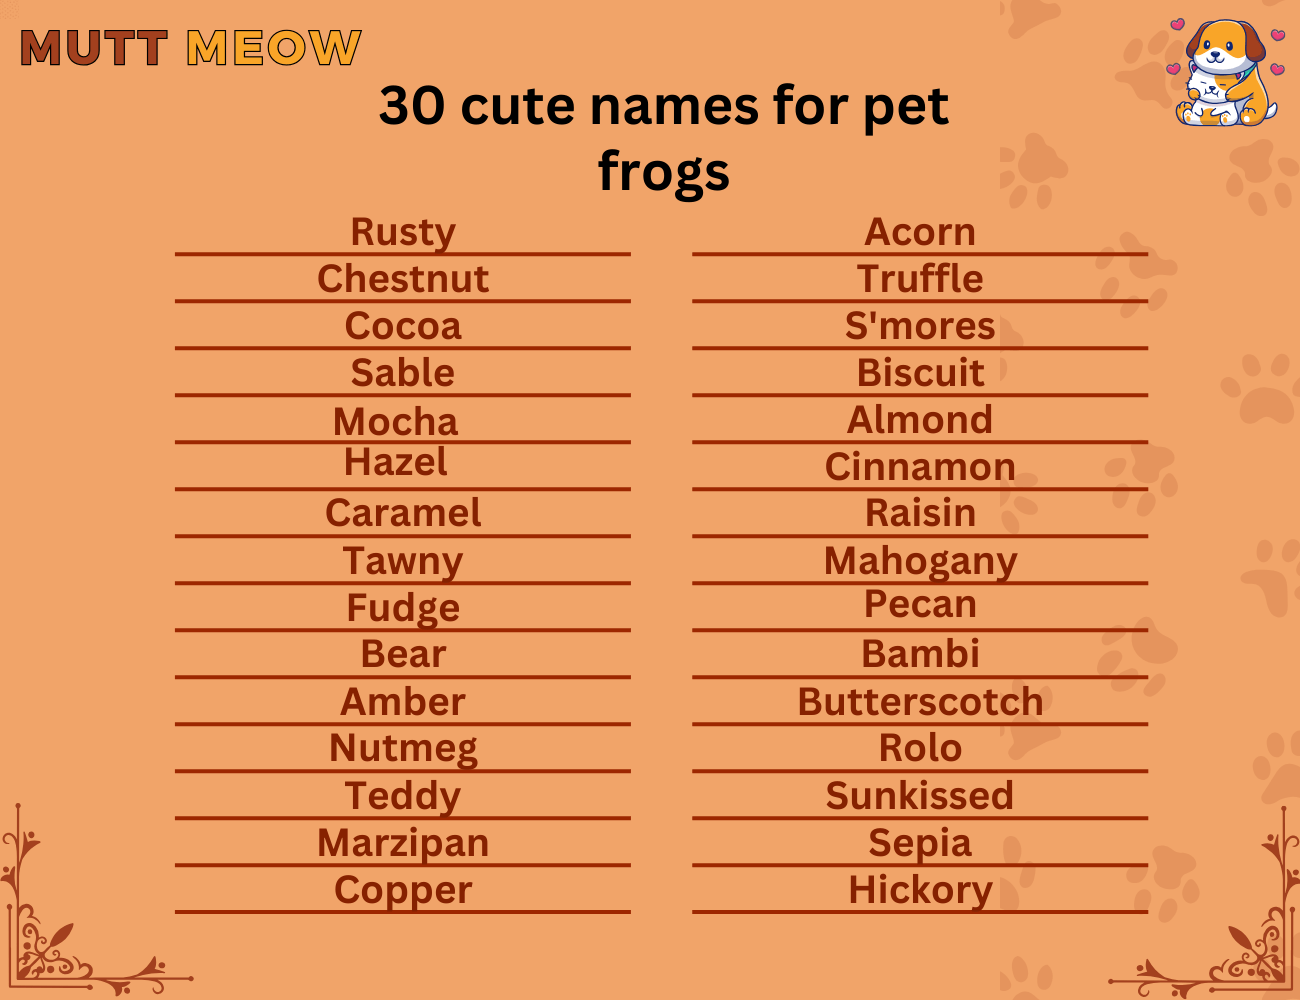 30 cute names for pet frogs